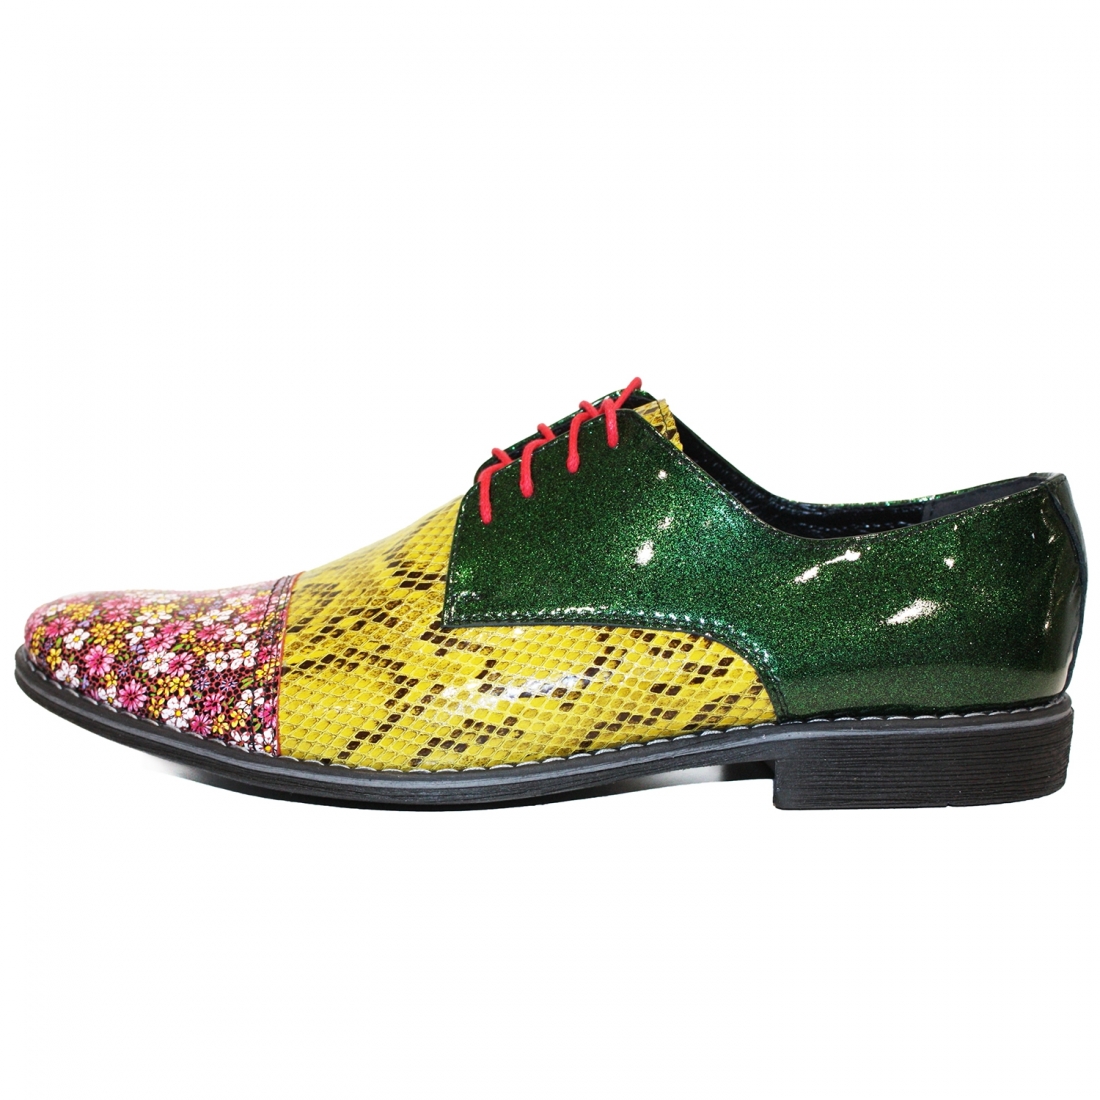 Modello Mixare - Chaussure Classique - Handmade Colorful Italian Leather Shoes